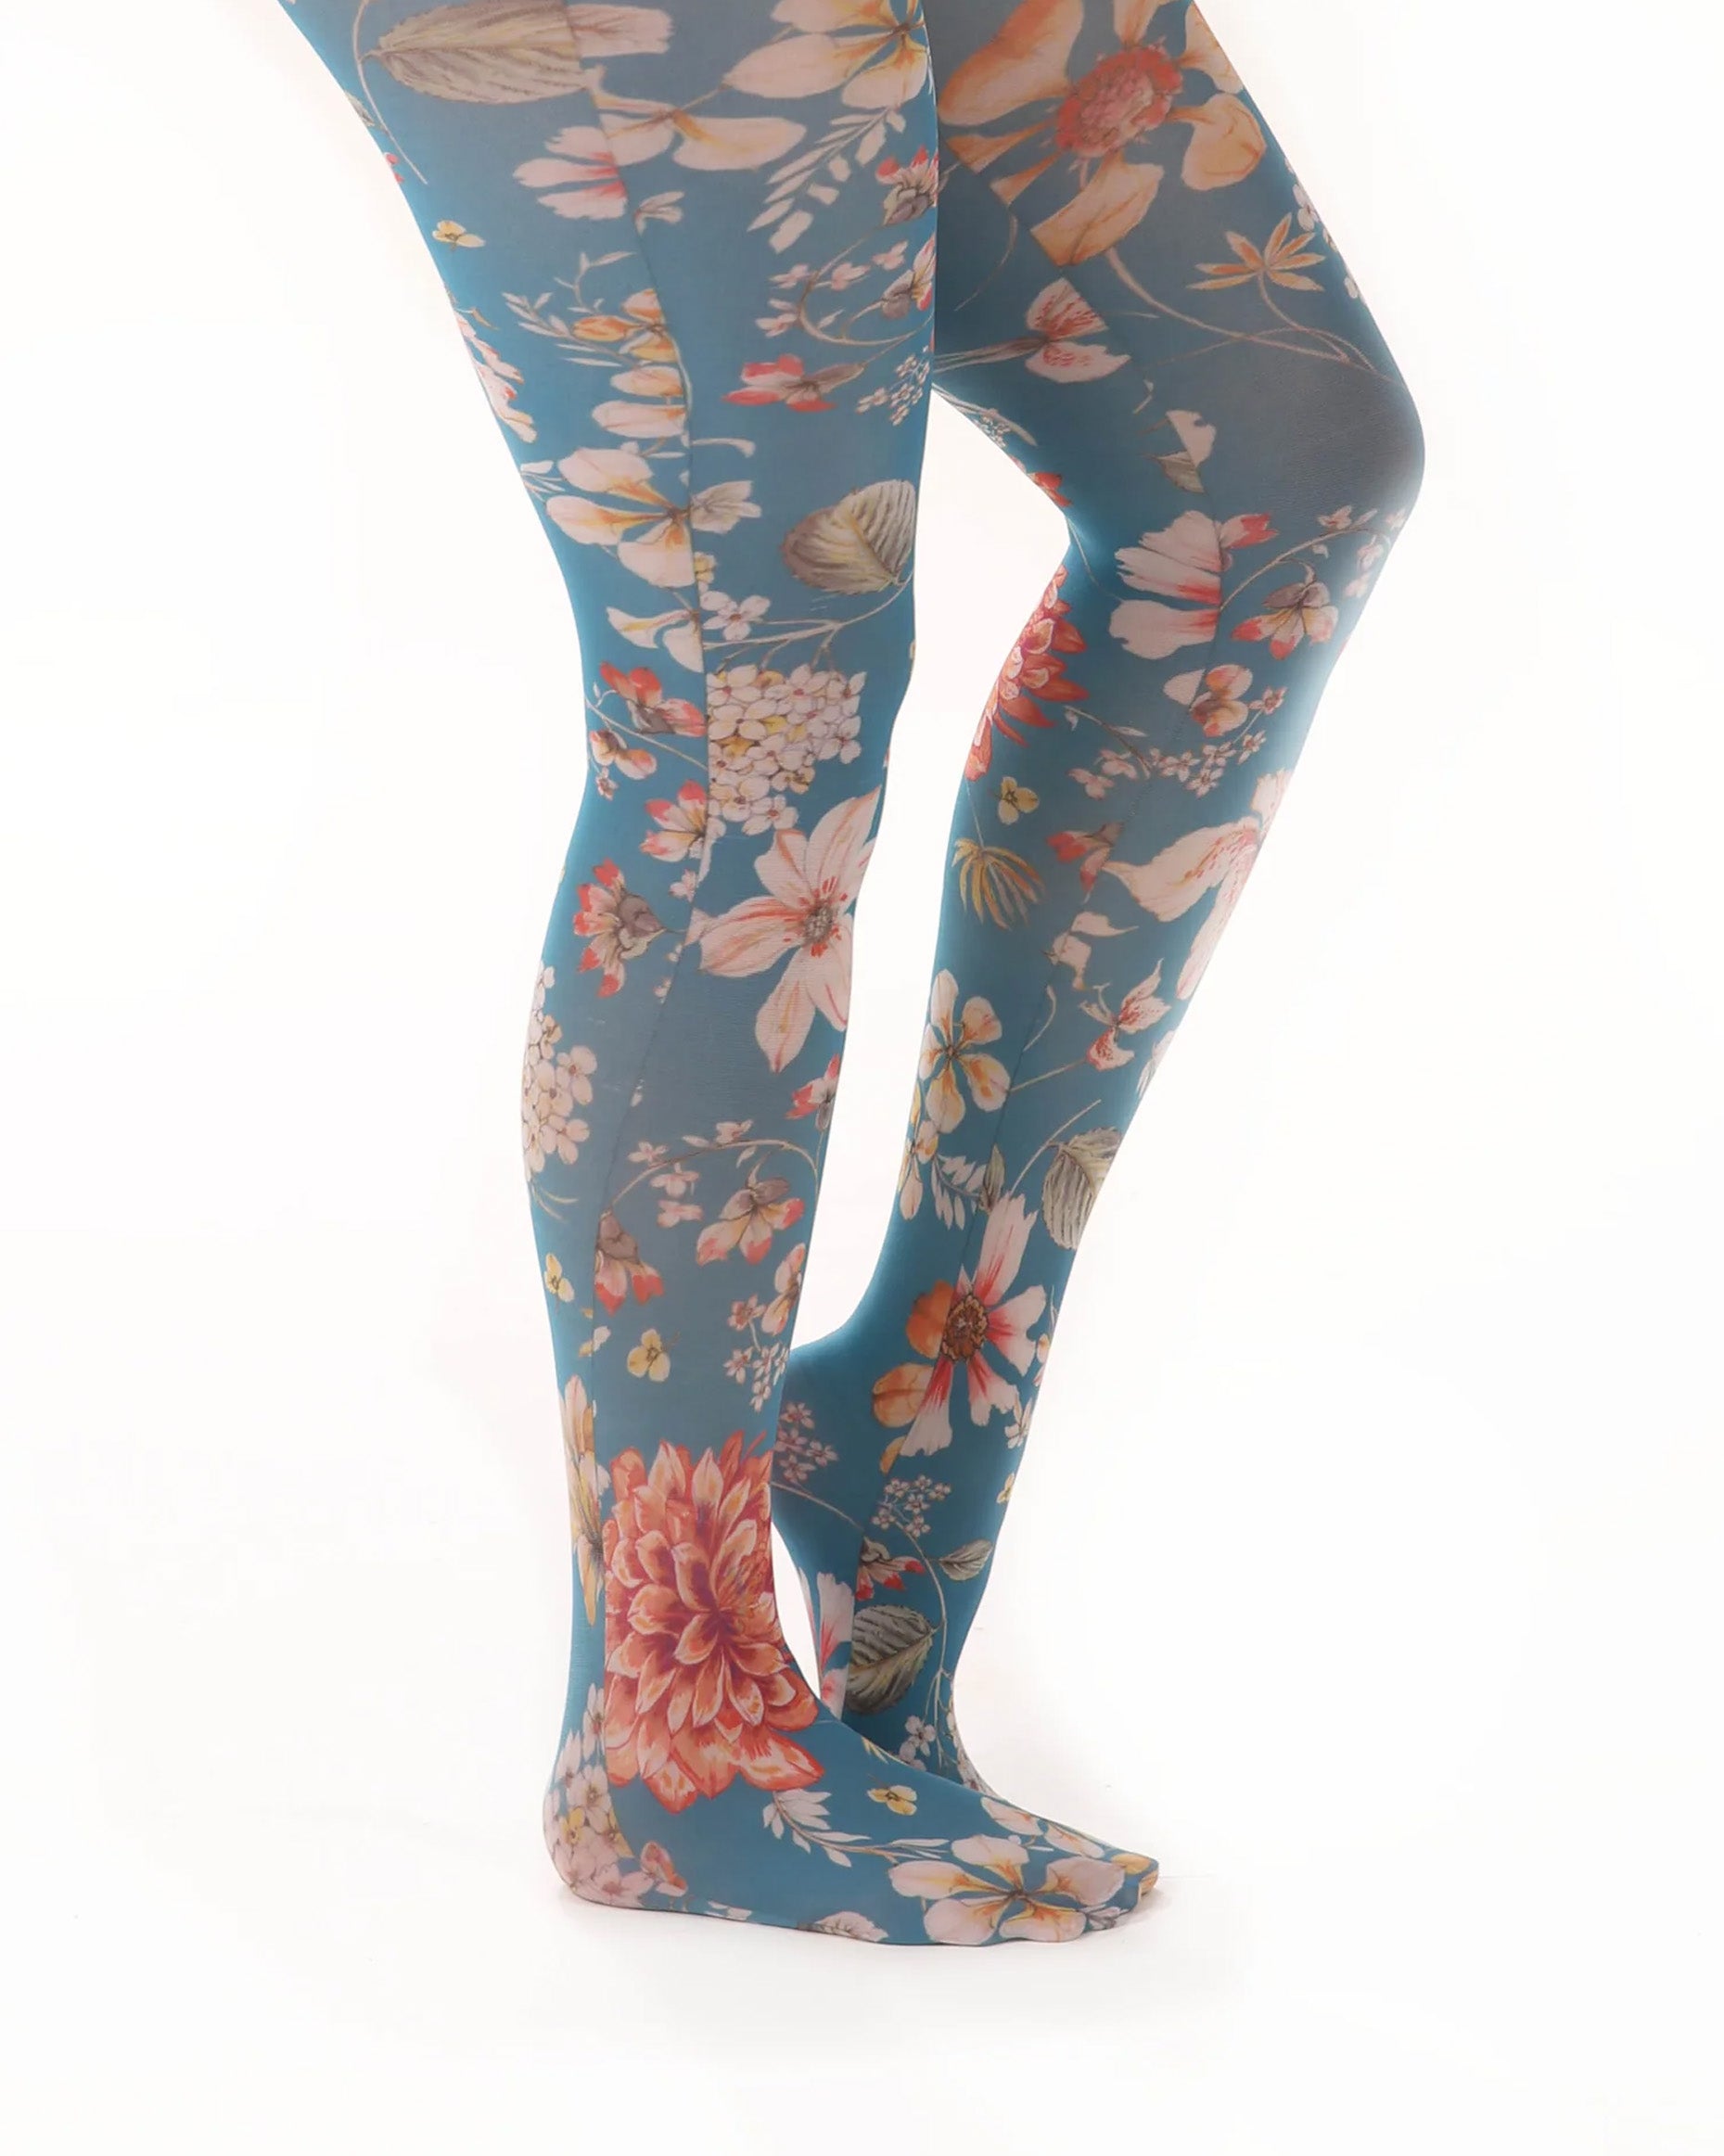 Pamela Mann Exotic Floral Print Tights - White opaque fashion tights with a floral printed pattern with teal blue background and multicoloured flowers. Side view.